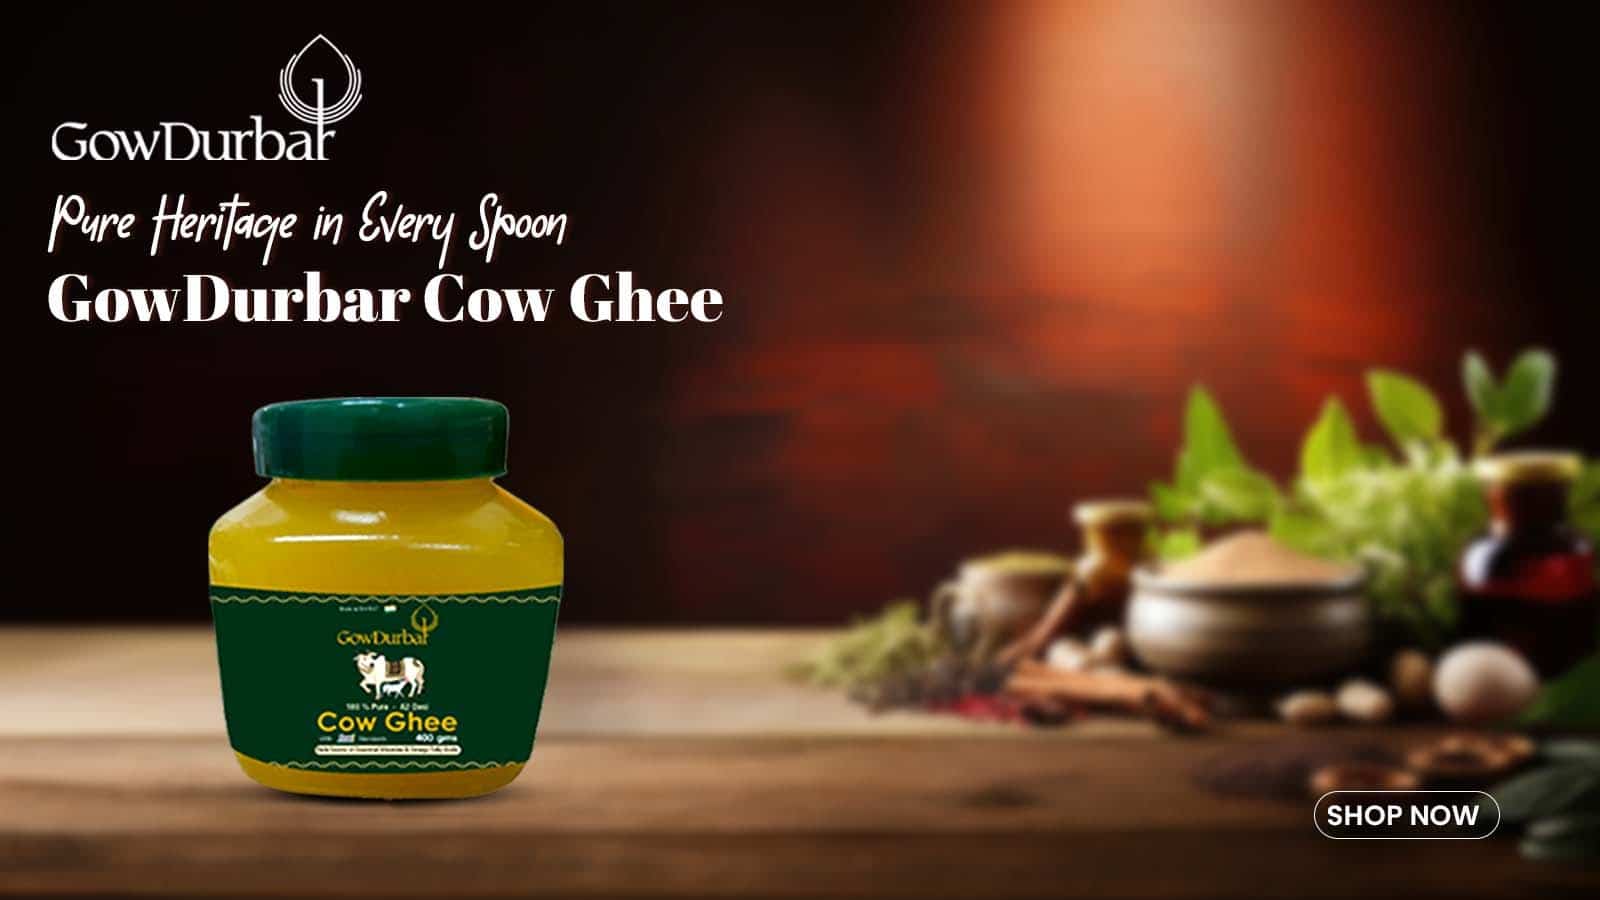 Pure Heritage in Every Spoon: GowDurbar Cow Ghee